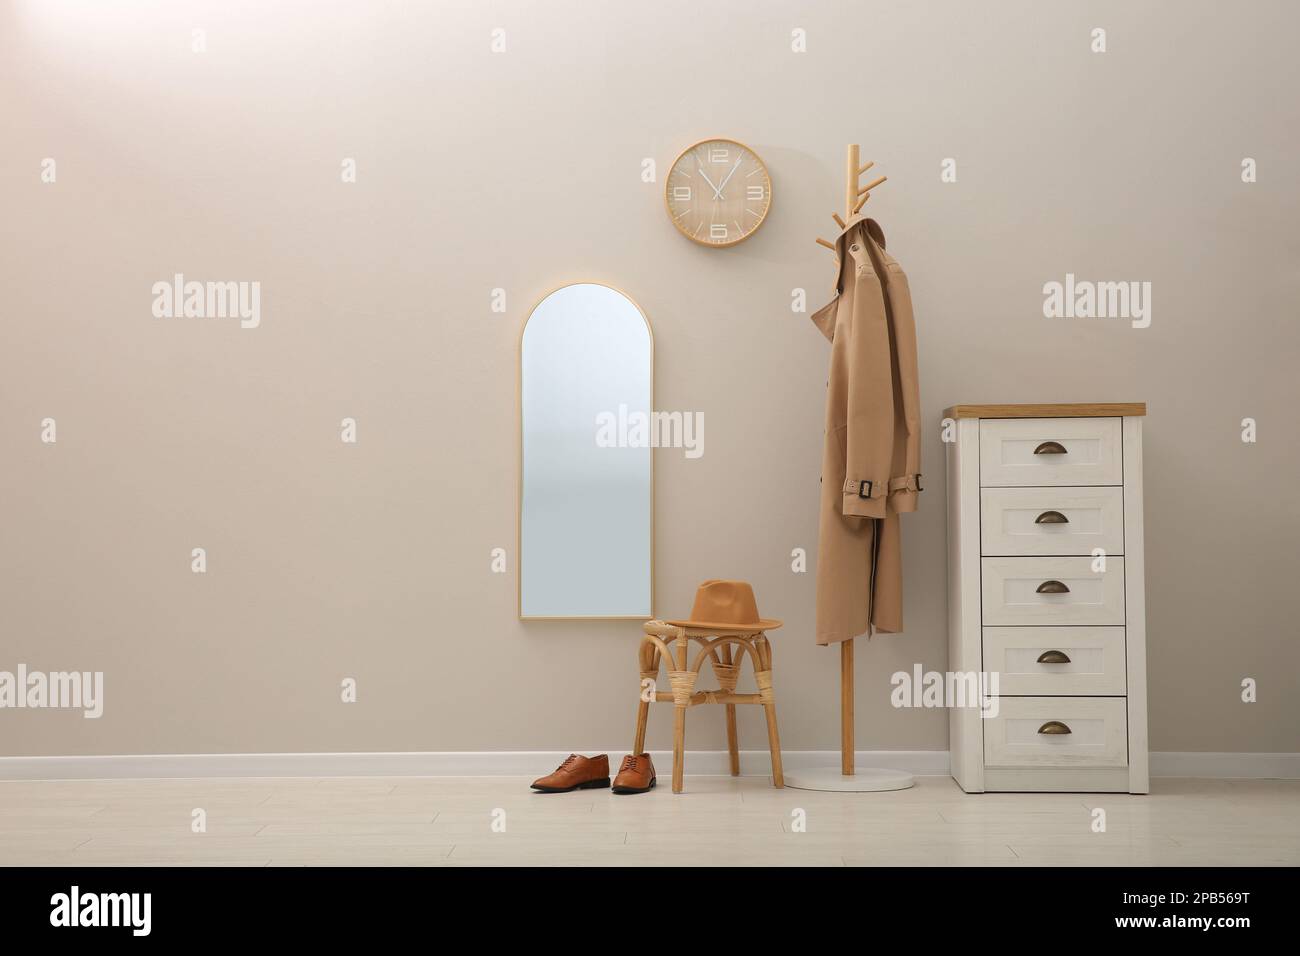 Hallway interior with wooden furniture near light wall. Stylish accessories Stock Photo